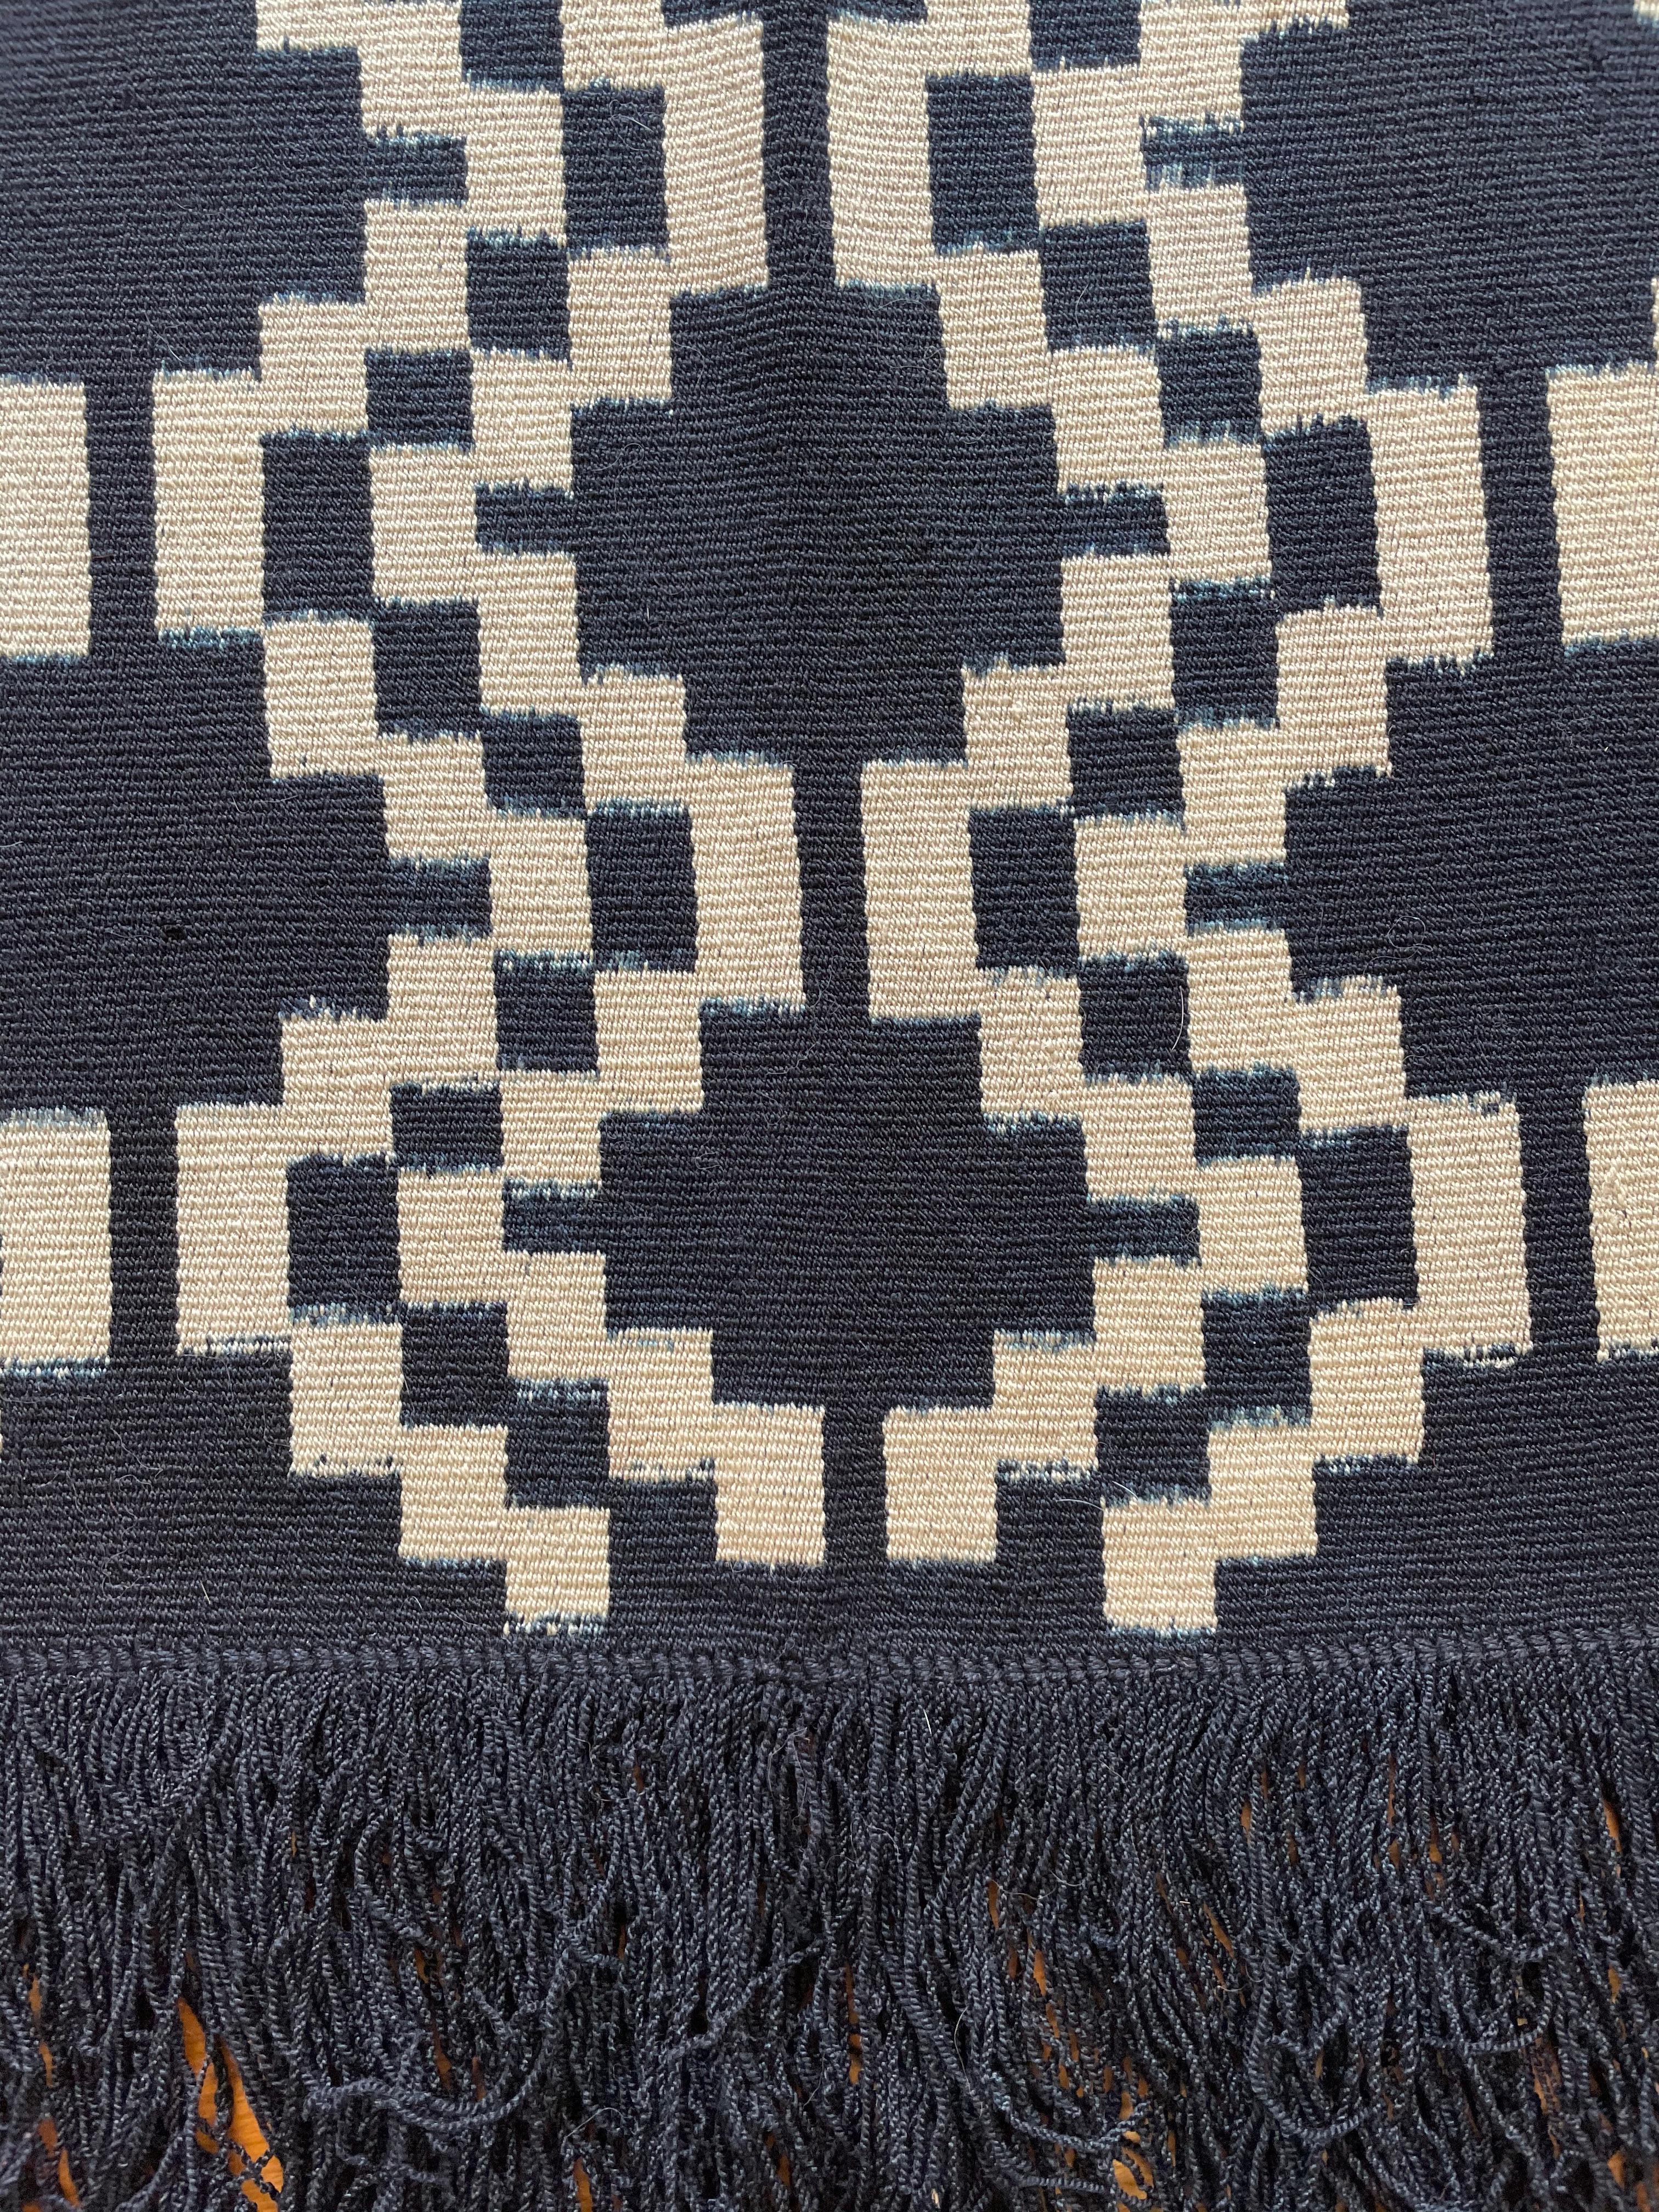 Tribal Antique Mapuche Chief's Poncho, Chile or Argentina